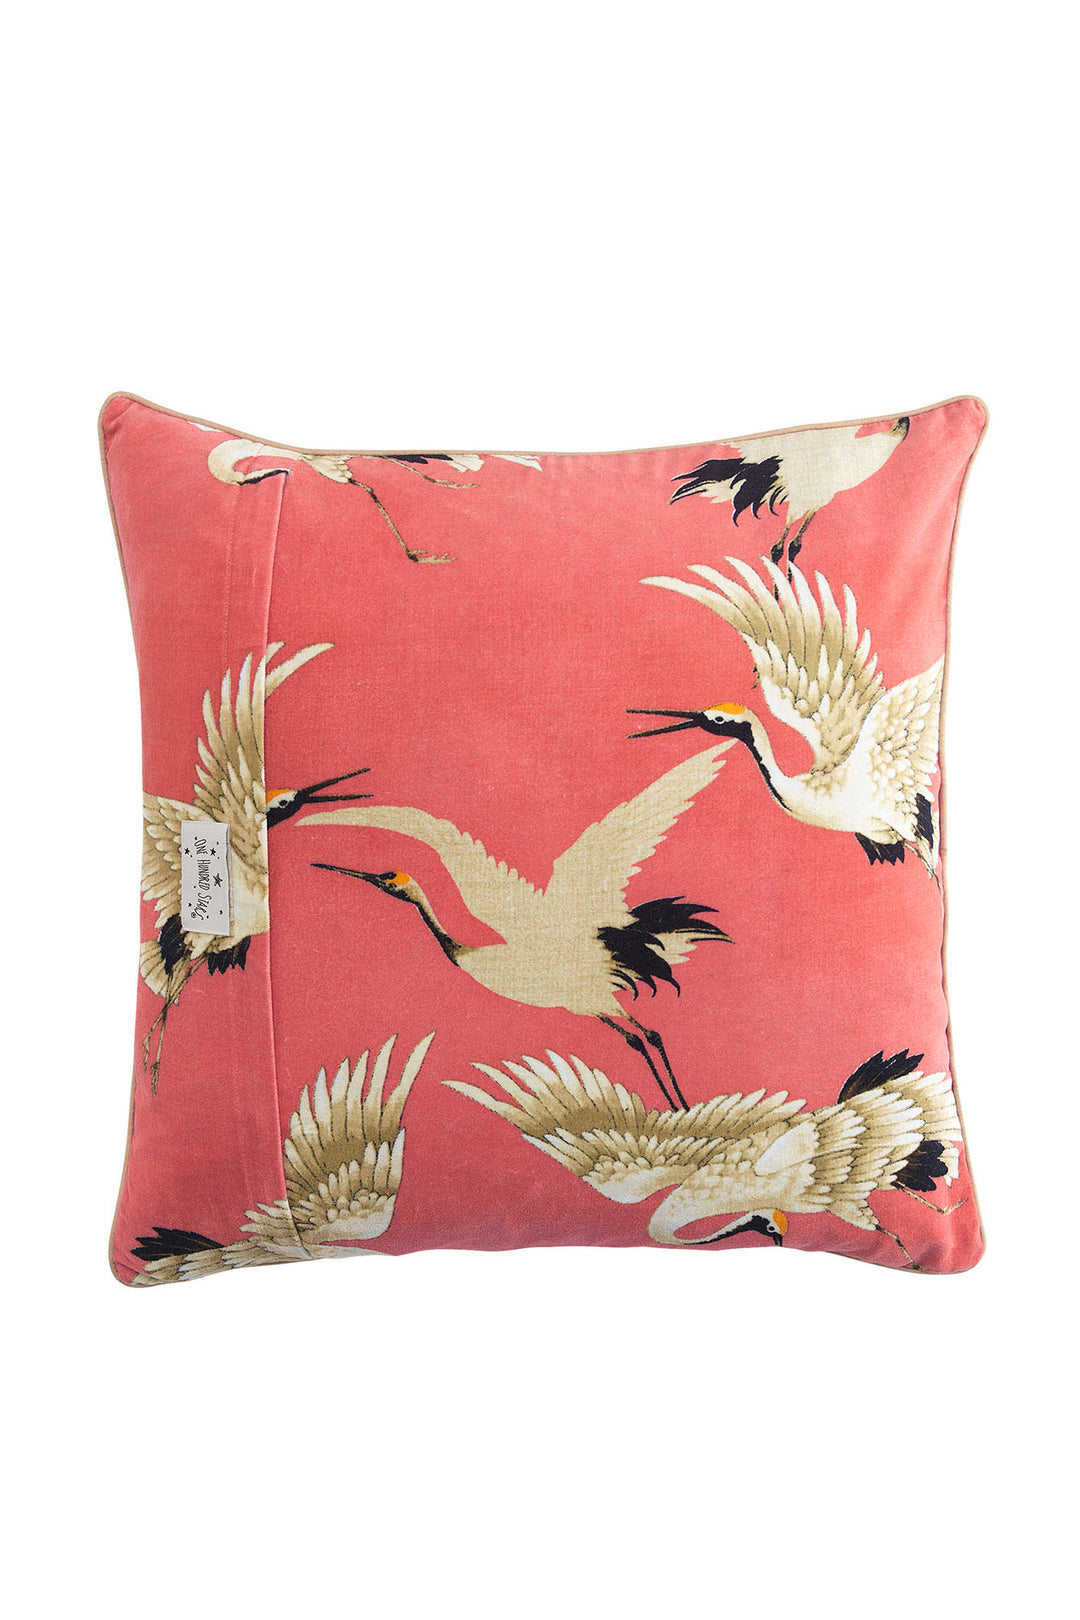 One Hundred Stars Stork Crane Lipstick Pink Square Velvet Cushion - Storks and cranes have been a major art deco trend in both fashion and interiors and this Stork Lipstick Pink Square Velvet Cushion is perfect for anyone looking for something chic, stylish and in vogue!